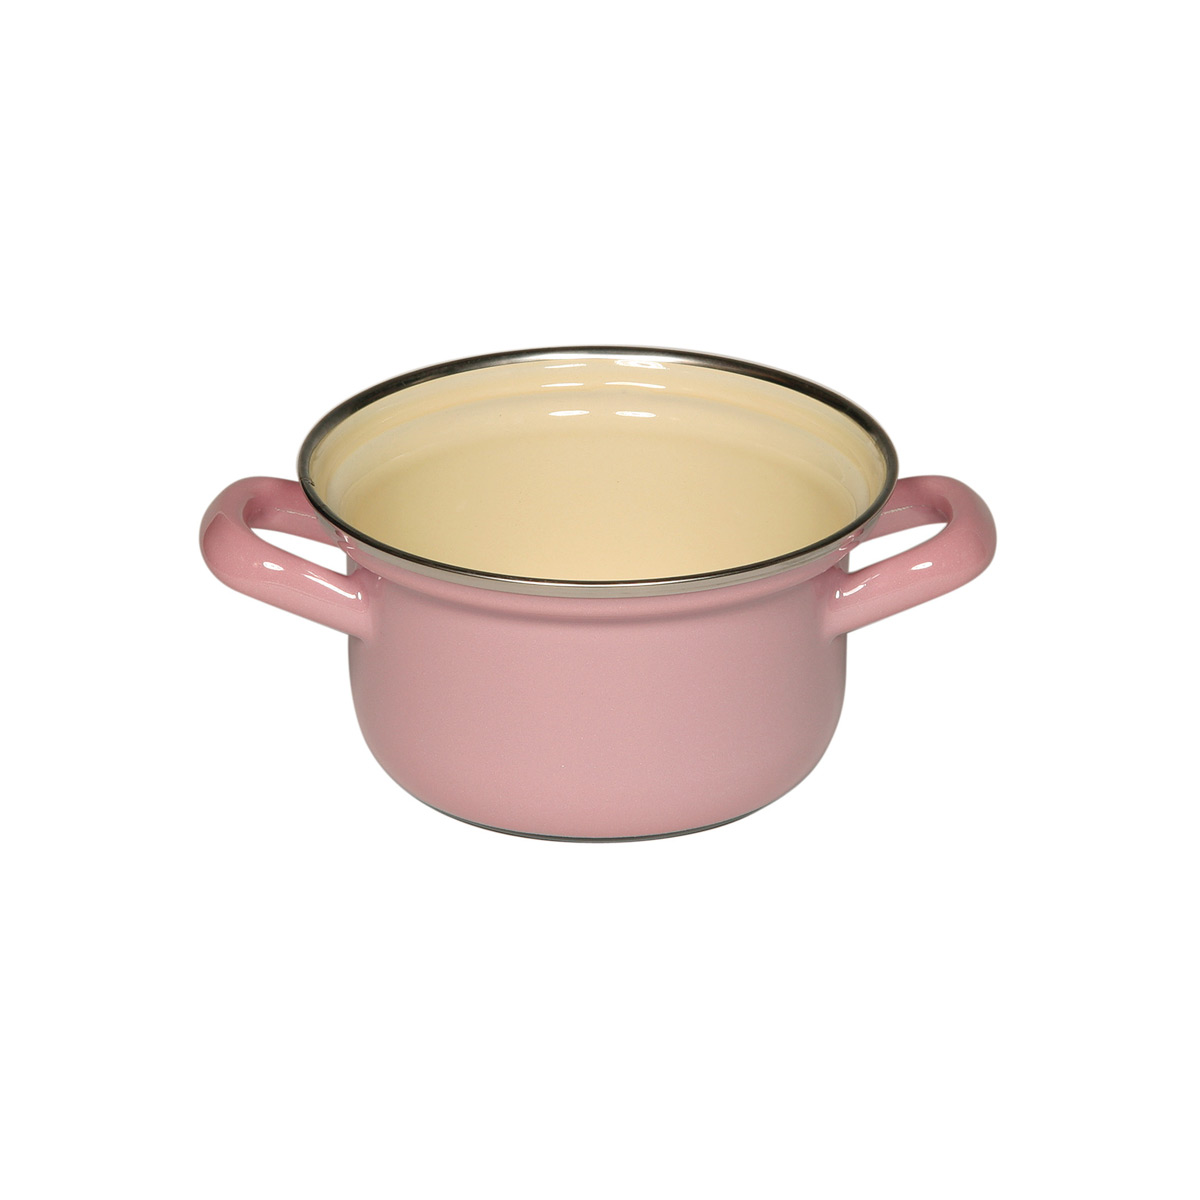 Riess Classic Bunt - Pastell Kasserolle mit Chromrand Rosa 12 cm / 0,5 Ltr / aus Emaille